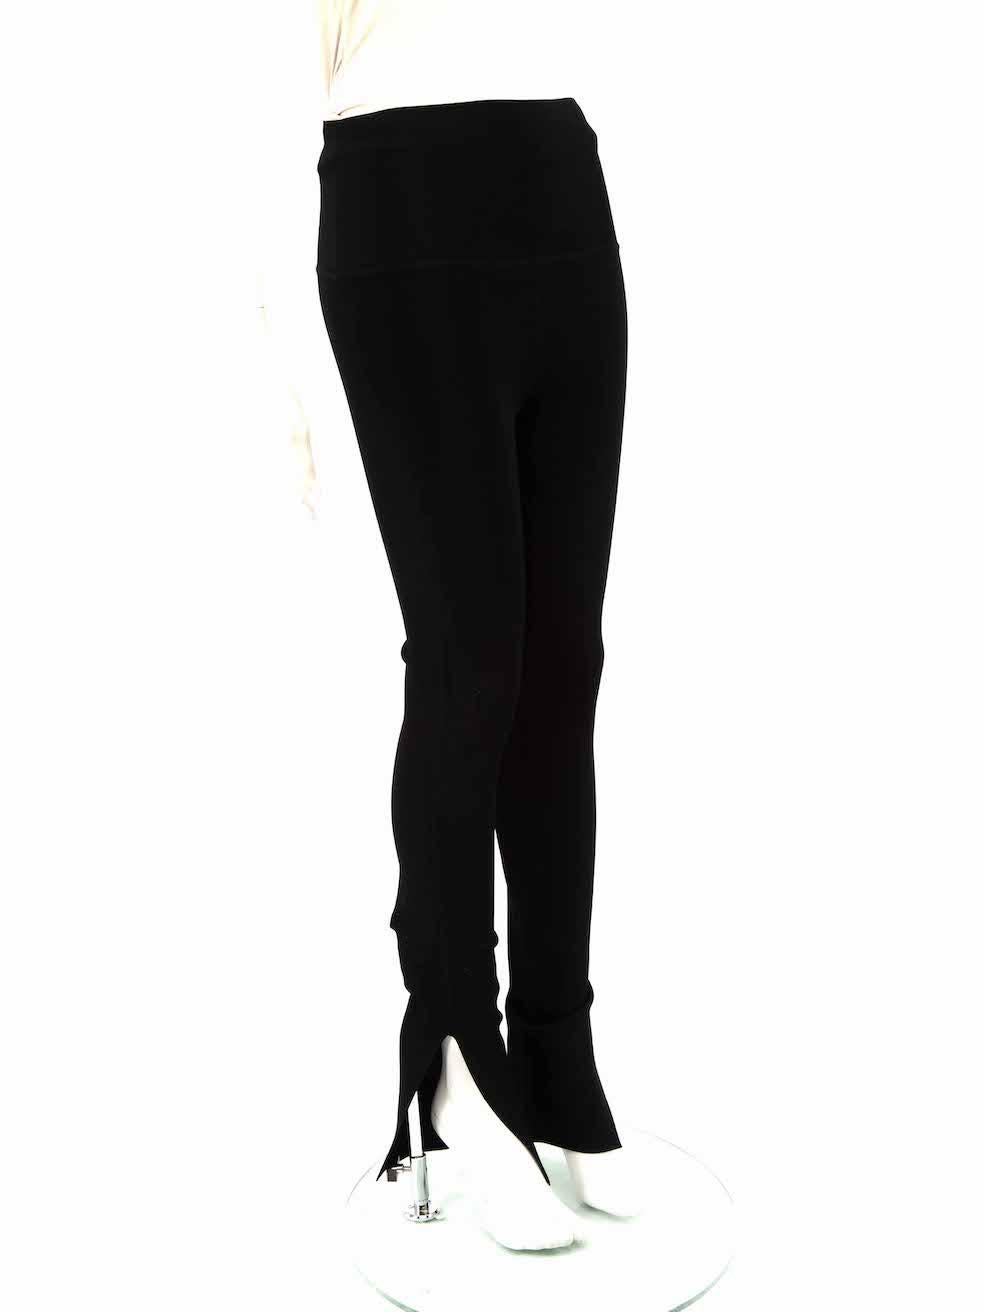 CONDITION is Very good. Hardly any visible wear to trousers is evident on this used Khaite designer resale item.
 
 
 
 Details
 
 
 Black
 
 Viscose
 
 Leggings
 
 High rise
 
 Stretchy
 
 Slit on the cuffs
 
 
 
 
 
 Made in Mongolia
 
 
 
